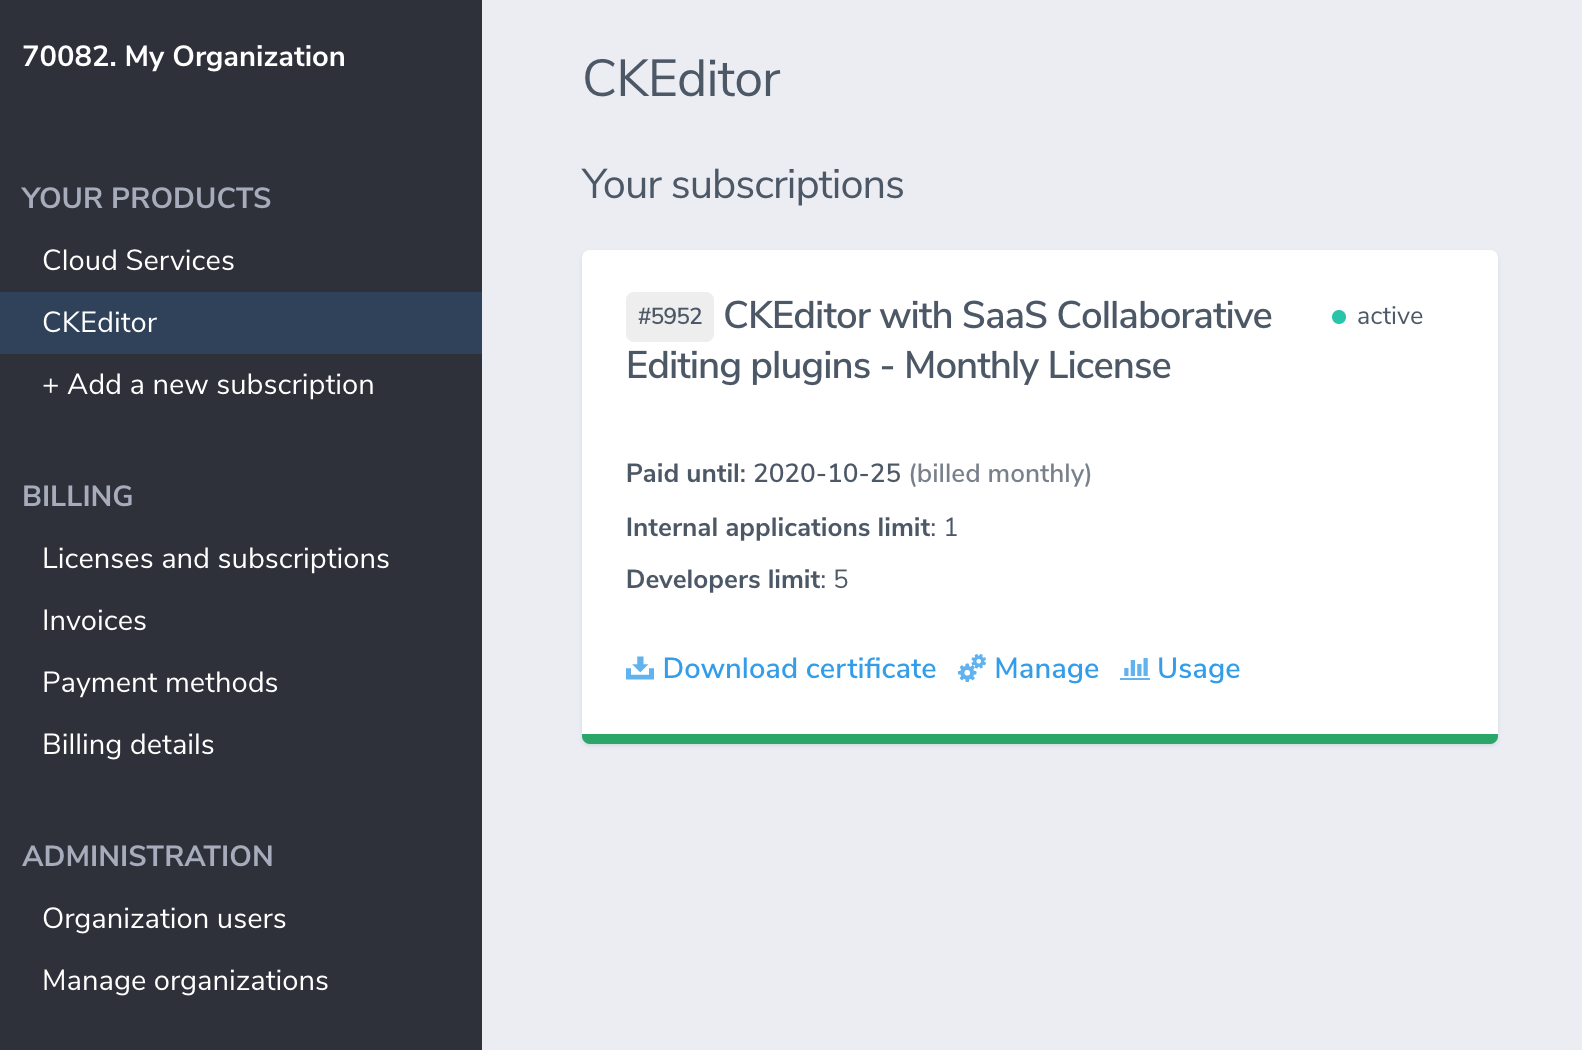 Your products view in the CKEditor Ecosystem customer dashboard.